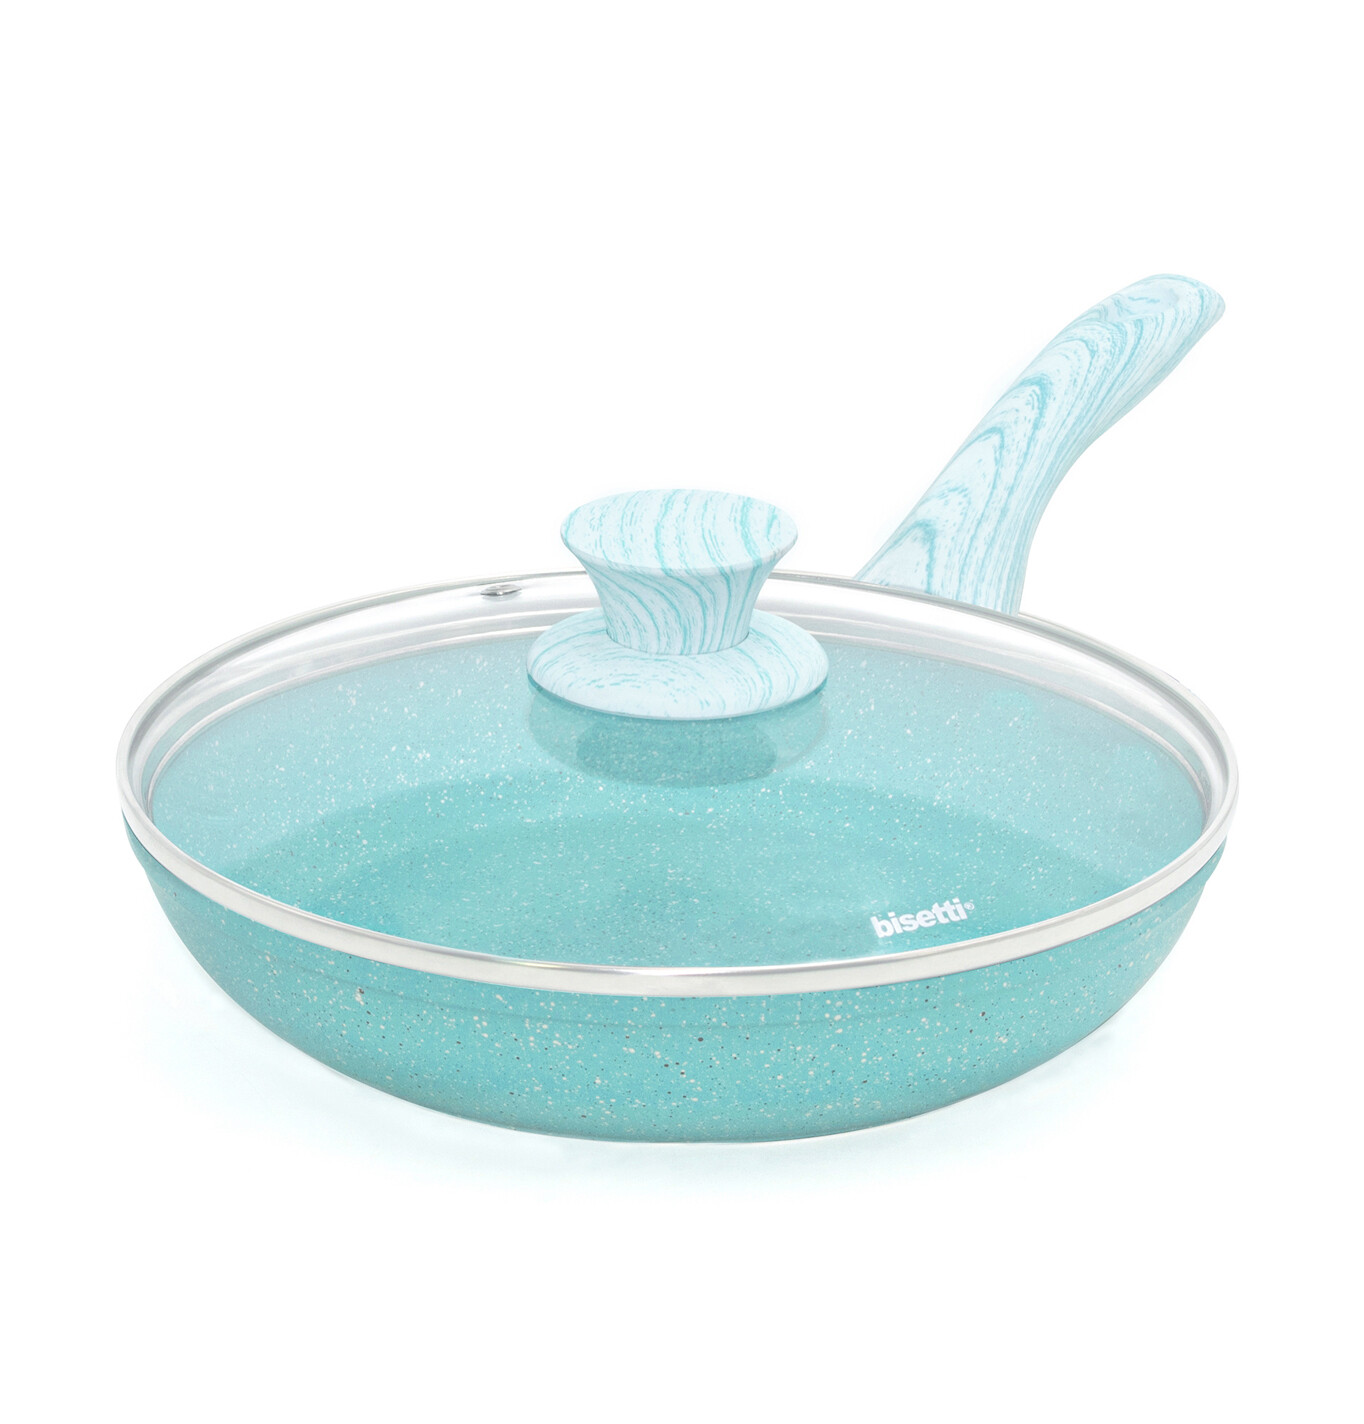 Pan Ø 24 cm 'Miss Gourmet' with turquoise wood colour handle and lid